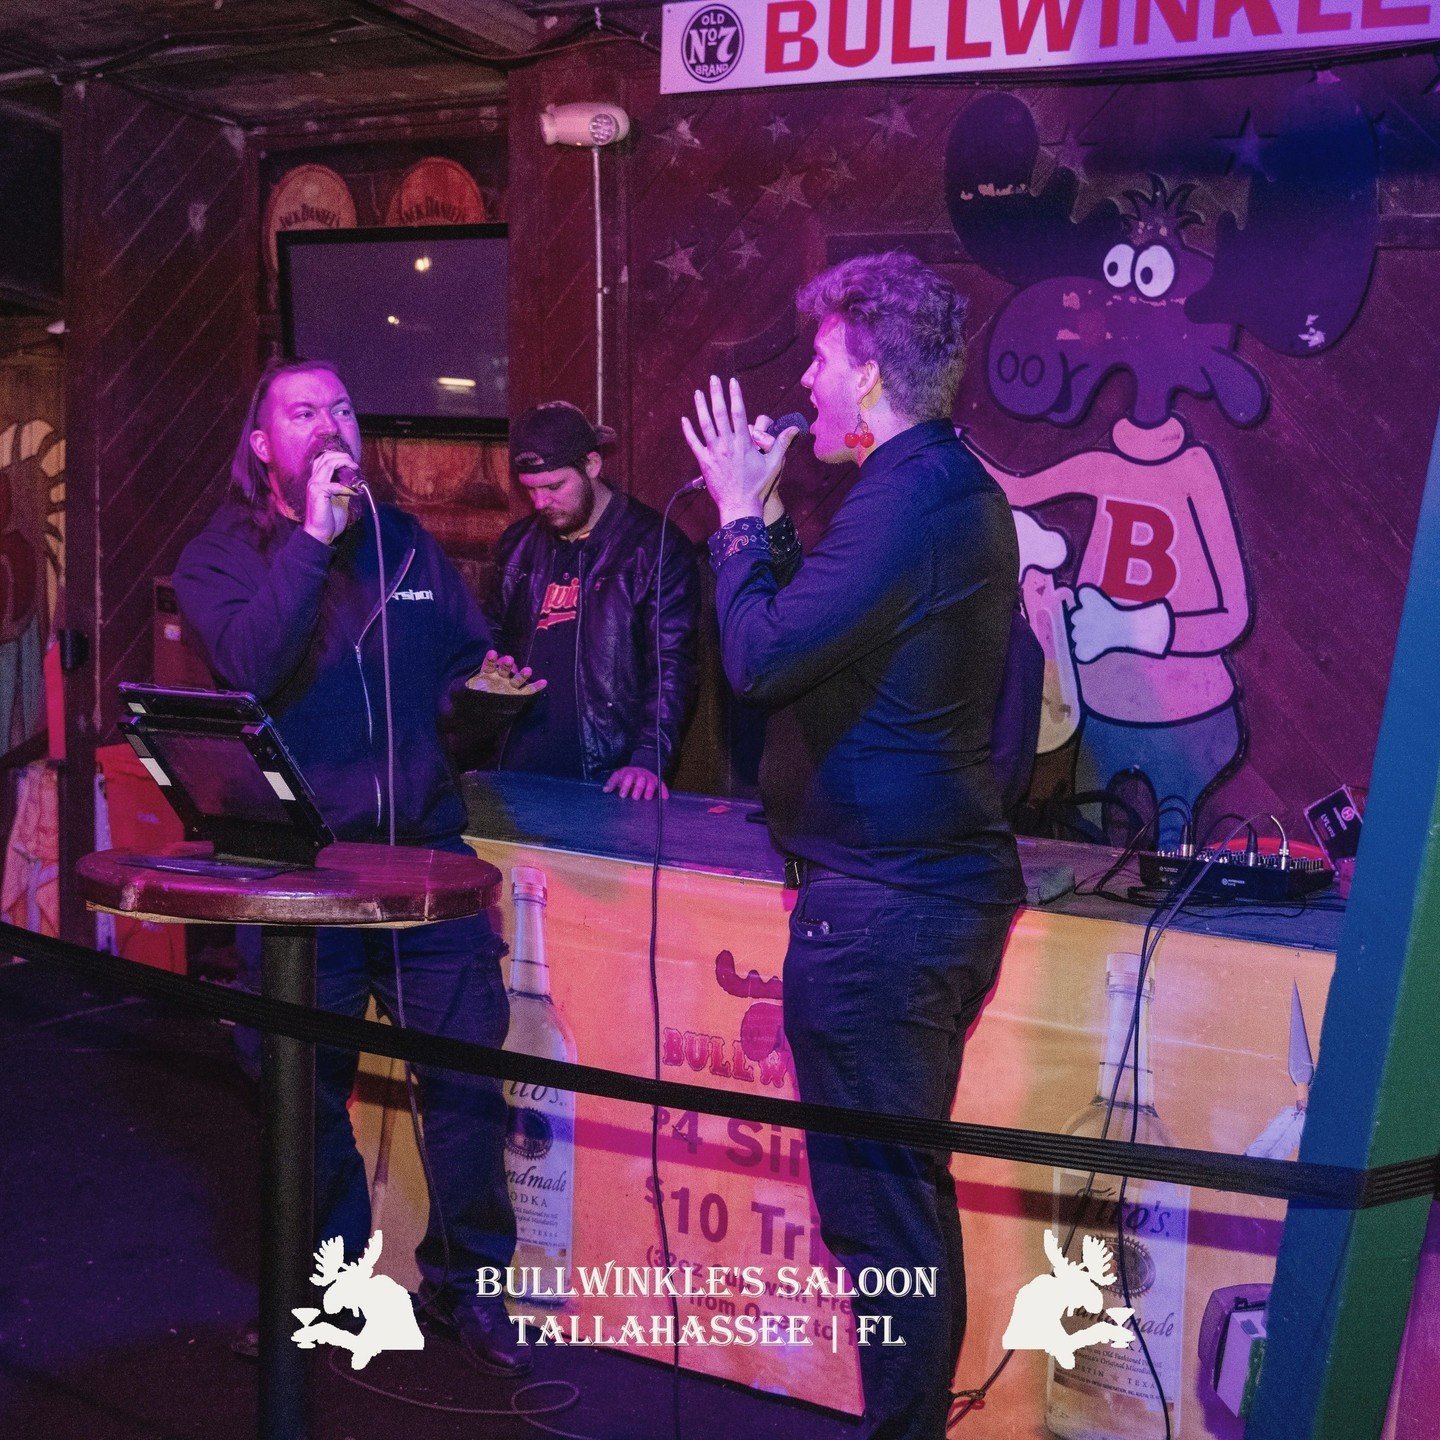 🎤 Bull Karaoke continues Tonight! Open @ 8pm w/ DJ Big B starting off the night &amp; an electrifying karaoke session kicking off around 10! No cover charge! 🙌 And with every stellar performance we're giving you $$ off your drinks! 🍹🎶 Don't miss 